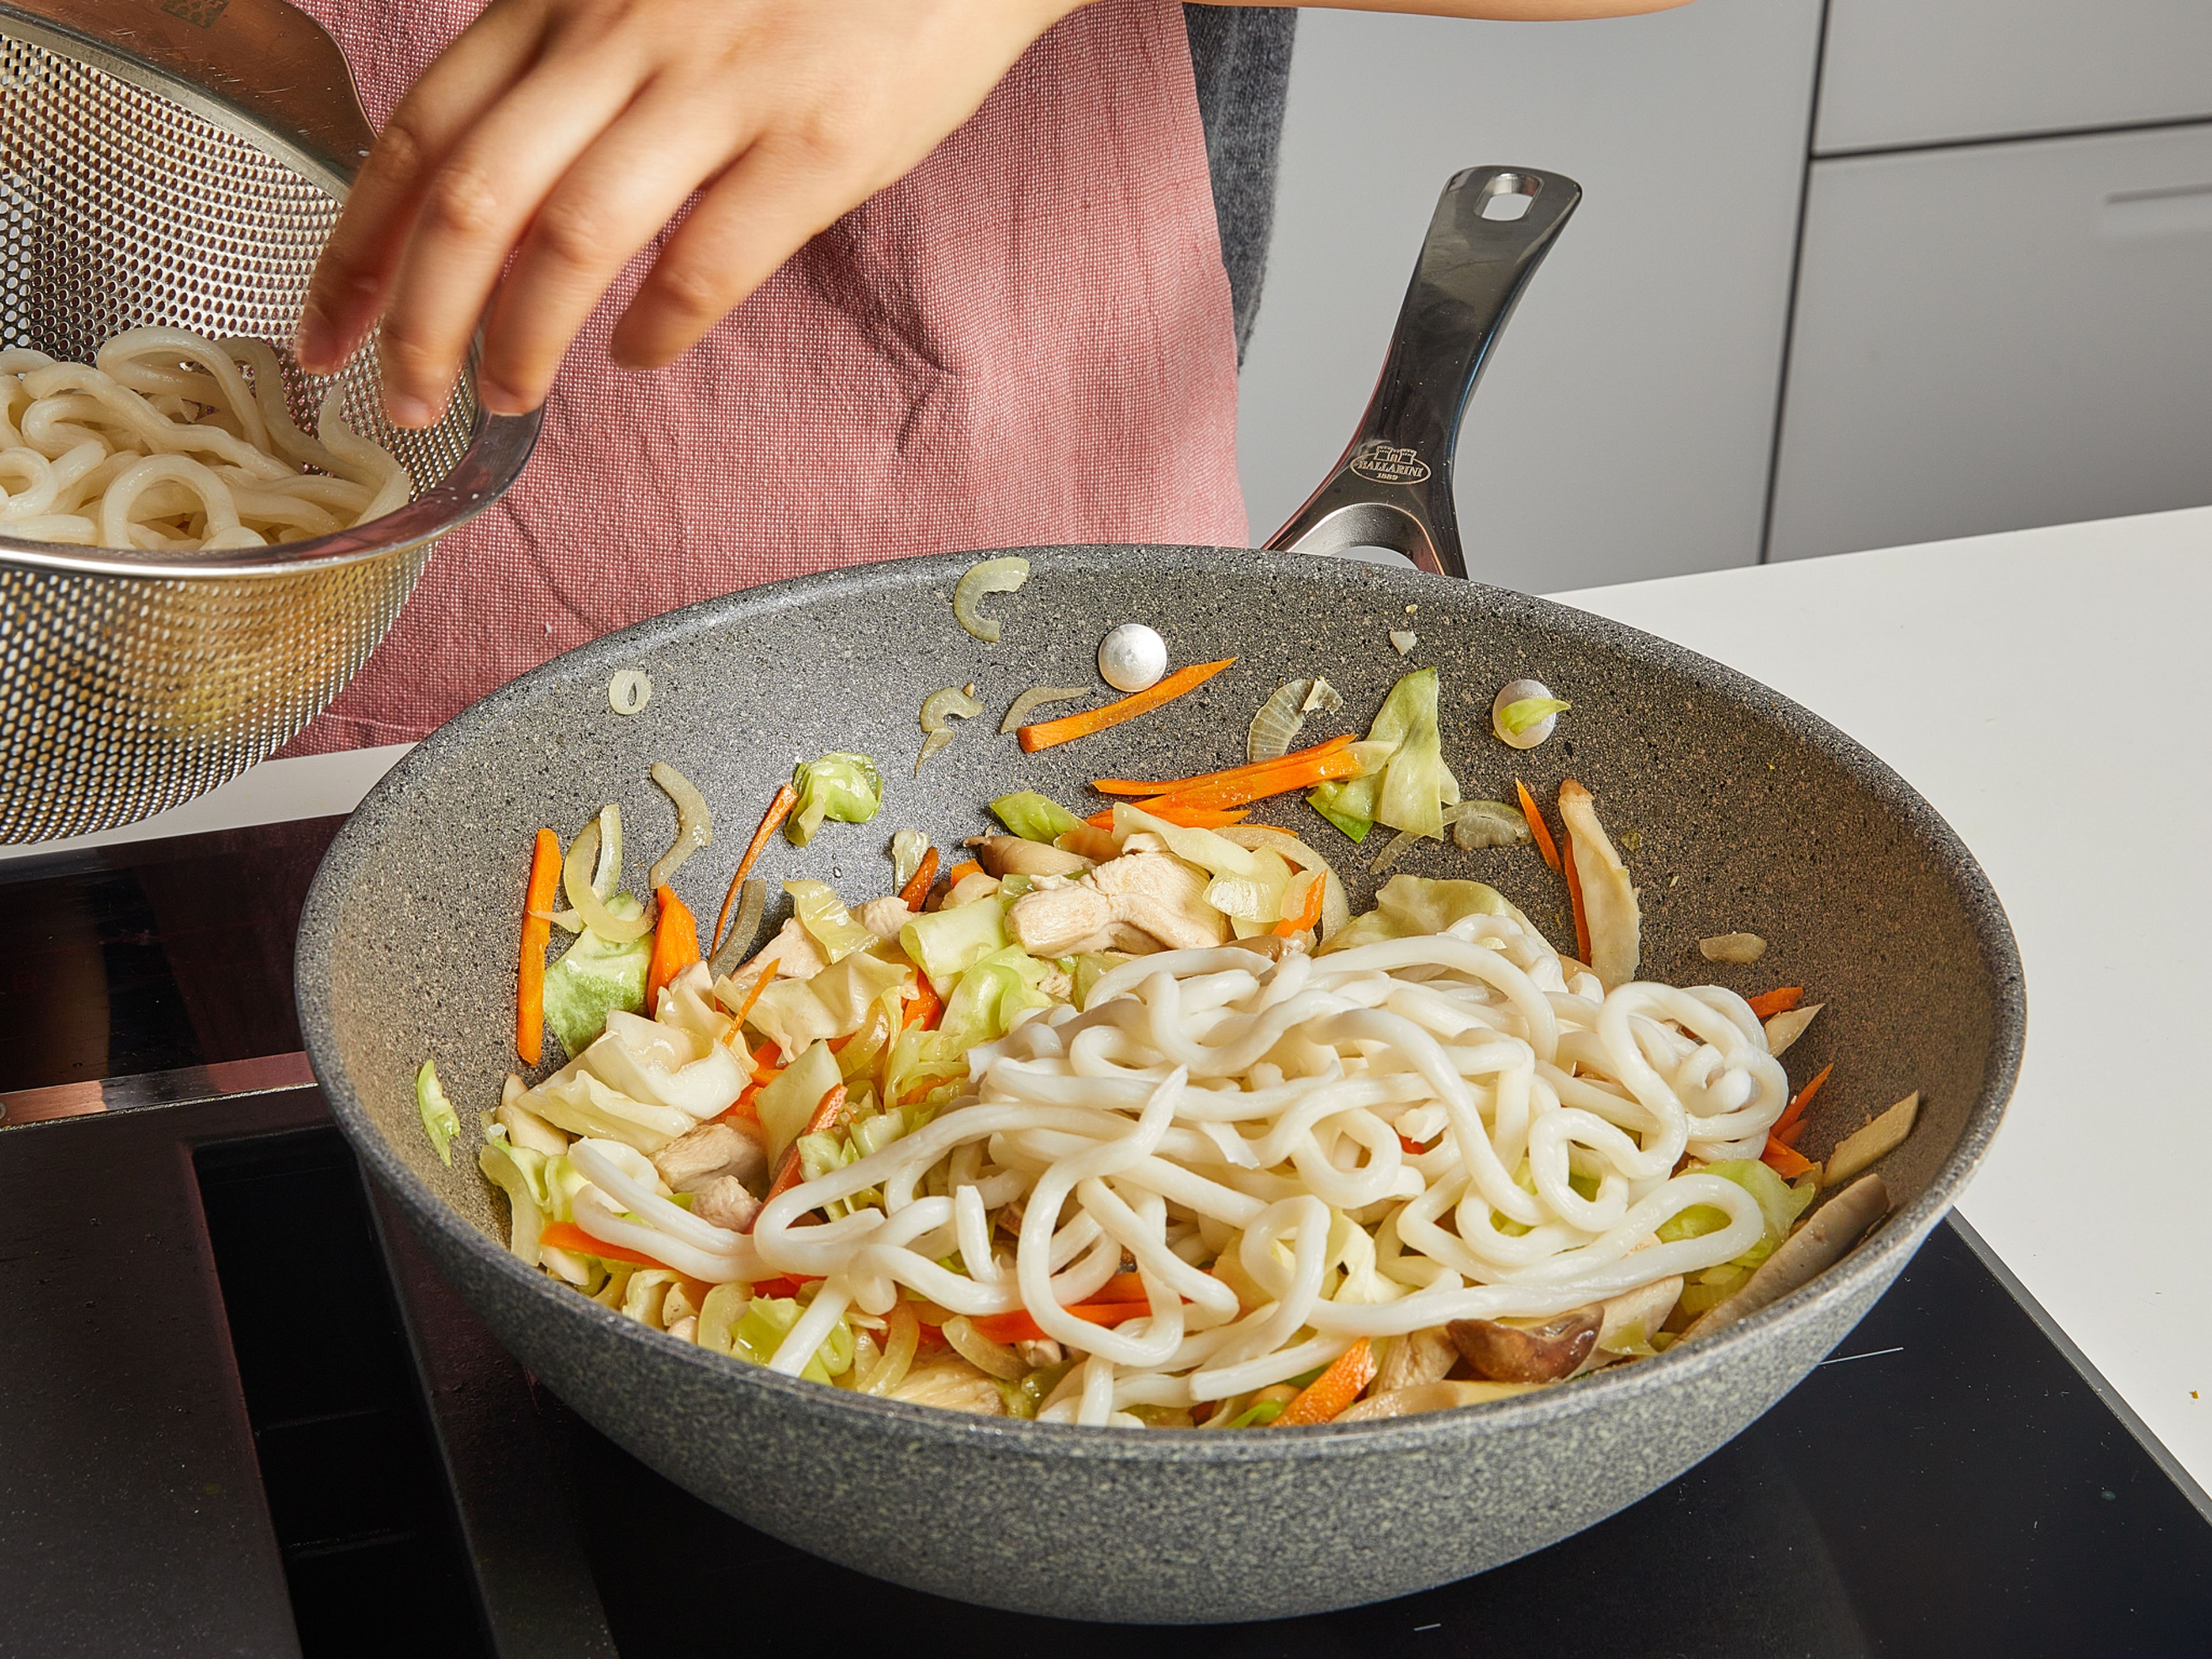 Add your drained, loose udon noodles. Then add the sauce mixture. Stir-fry for approx. 3–5 min. Use a pair of chopsticks to stir-fry the noodles, and mix until the sauce is well combined. Season with salt and pepper, garnish with scallion greens and serve immediately.